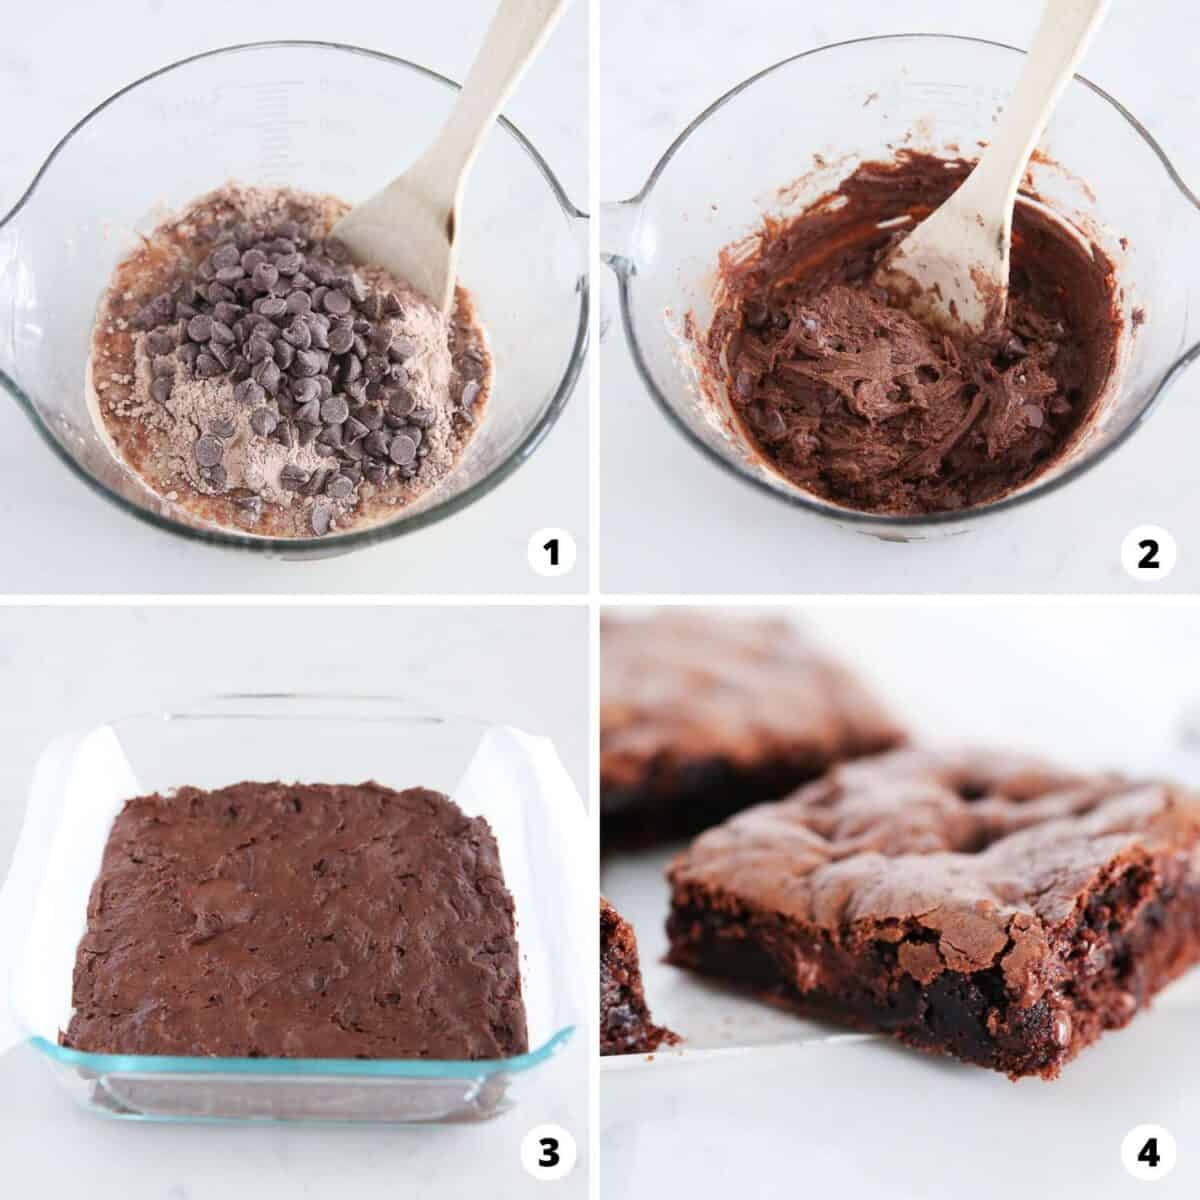 Showing how to make brownies out of a cake mix in a 4 step collage.